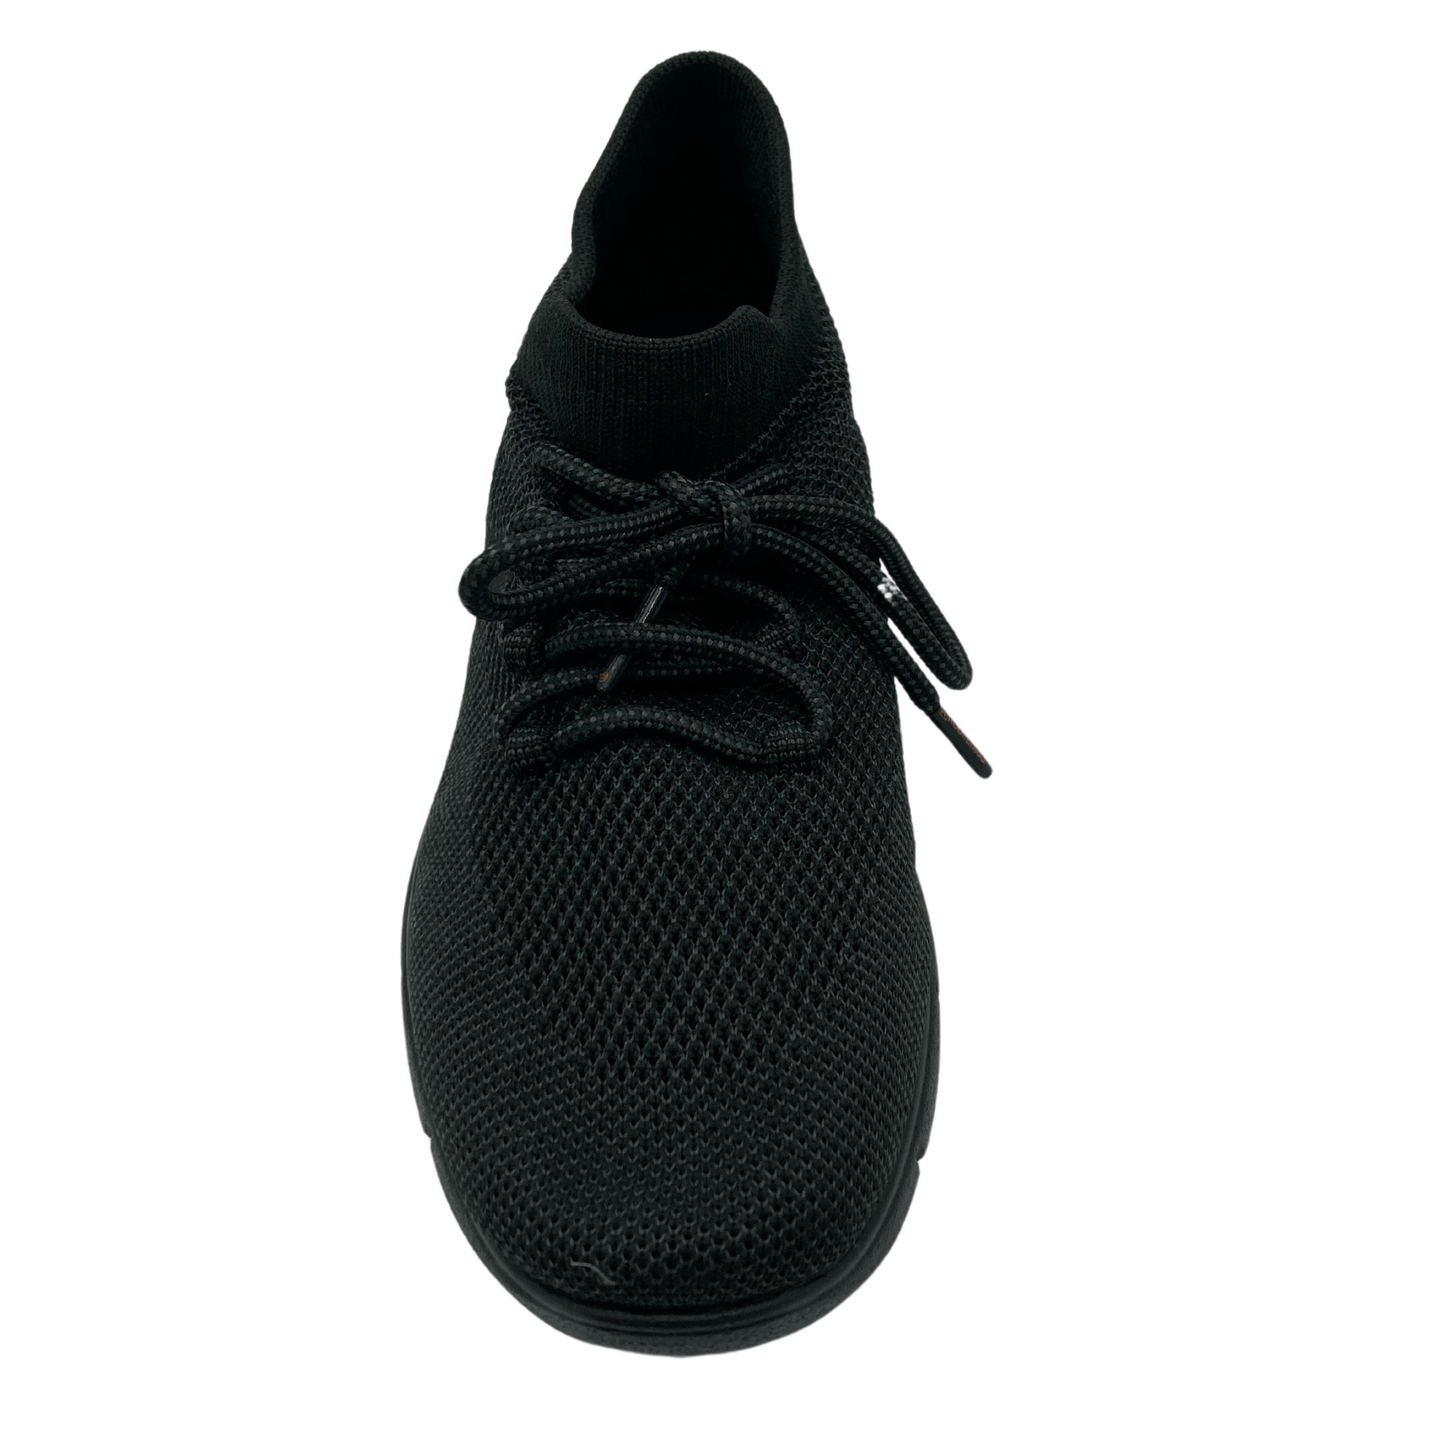 Top view of black mesh sneaker with black laces